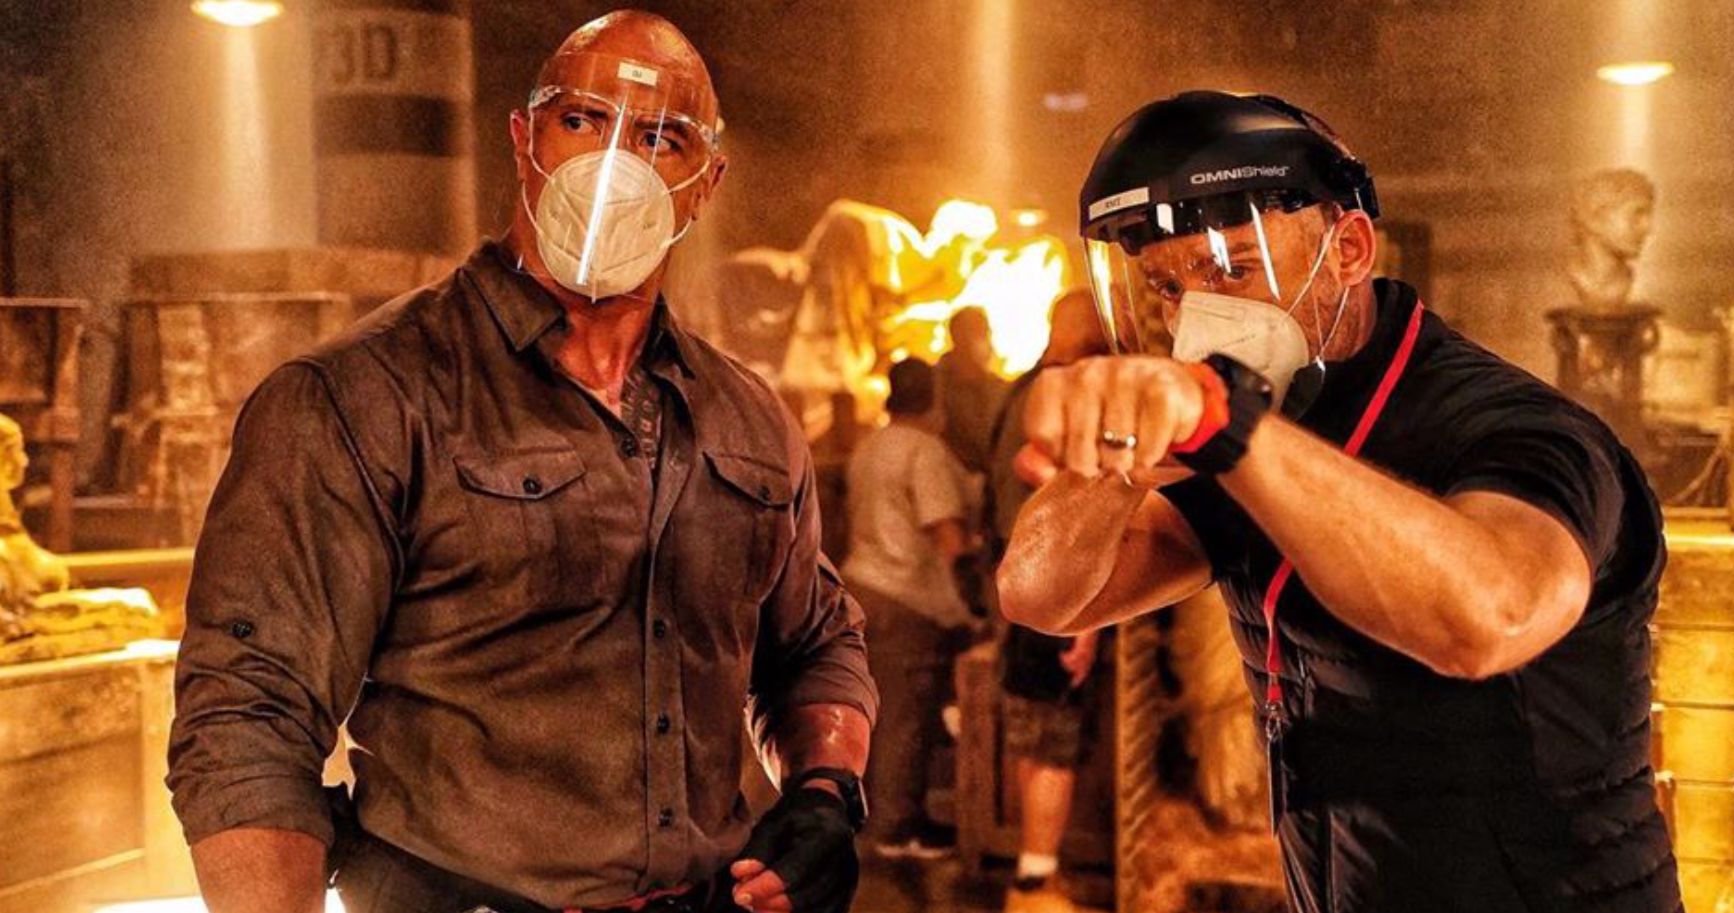 The Rock Shares New Look at Red Notice as Production Resumes for Netflix